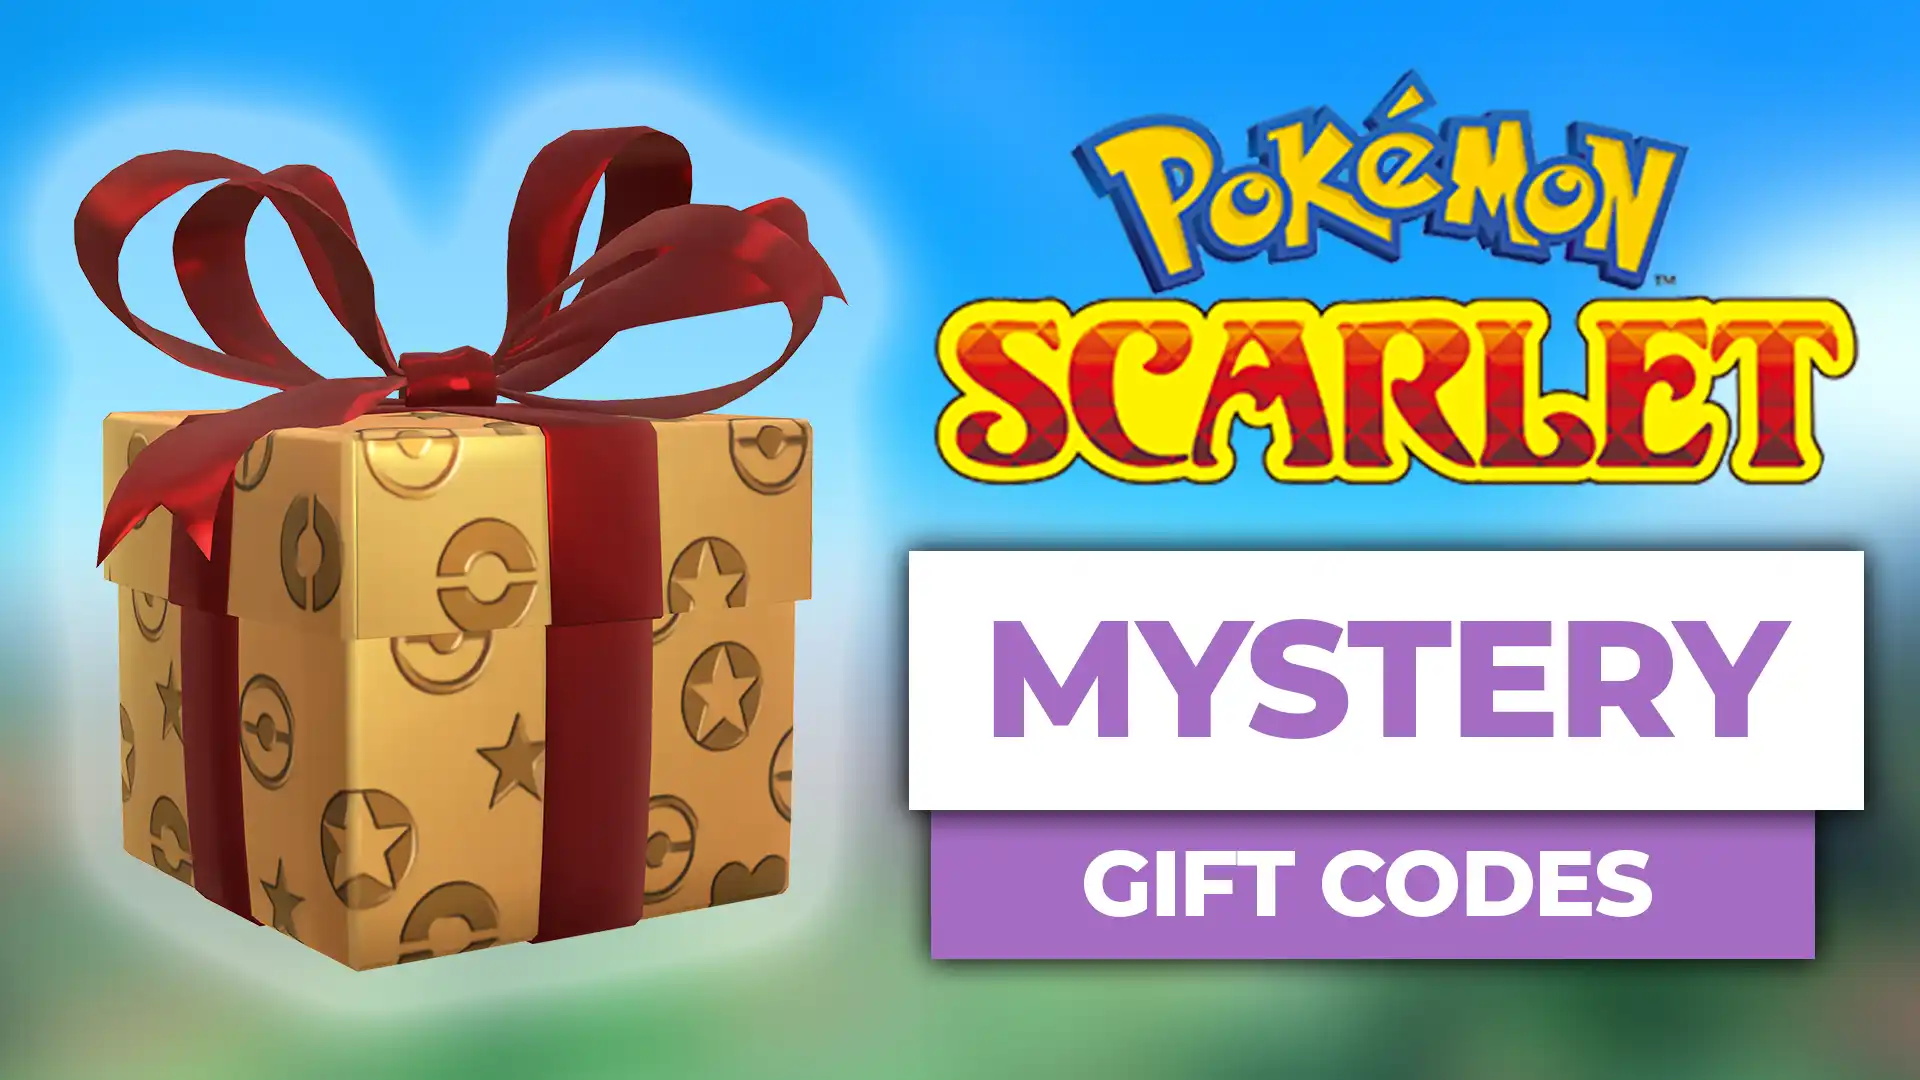 Pokemon Scarlet and Violet Mystery Gift Codes List & How to Redeem